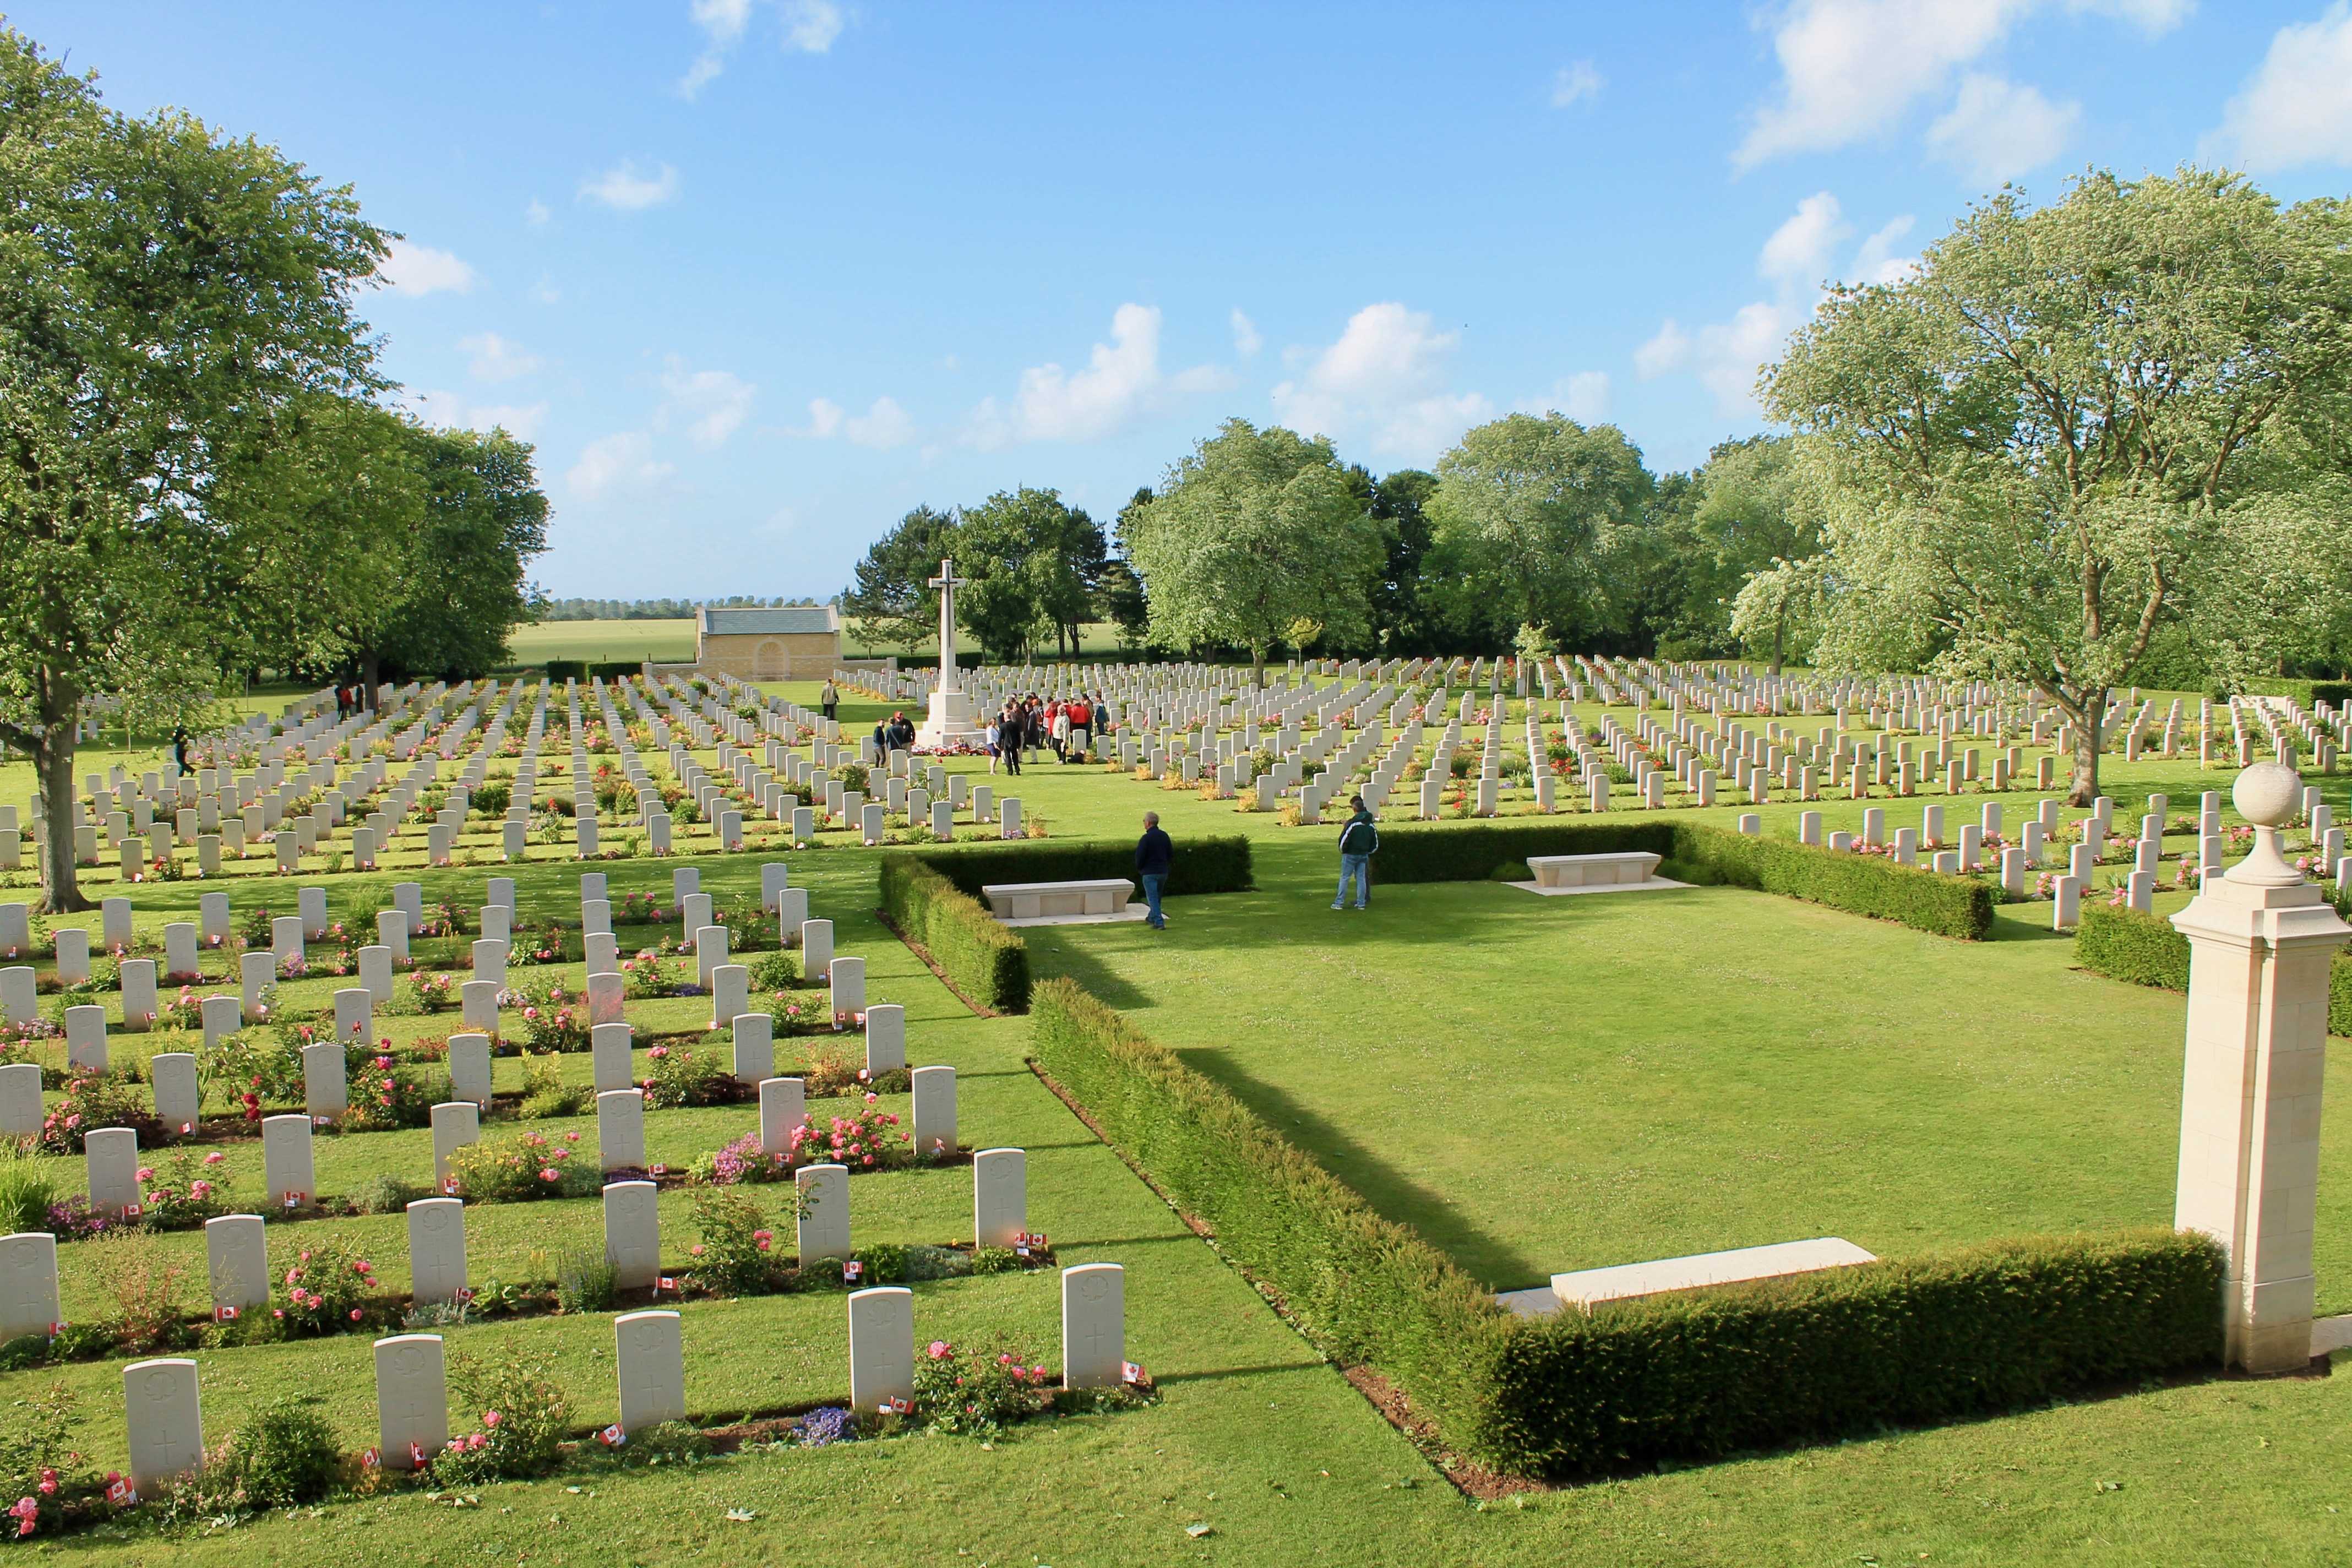 Colour photograph. A view of a military cemetery, with uniform white gravestones in neat rows.